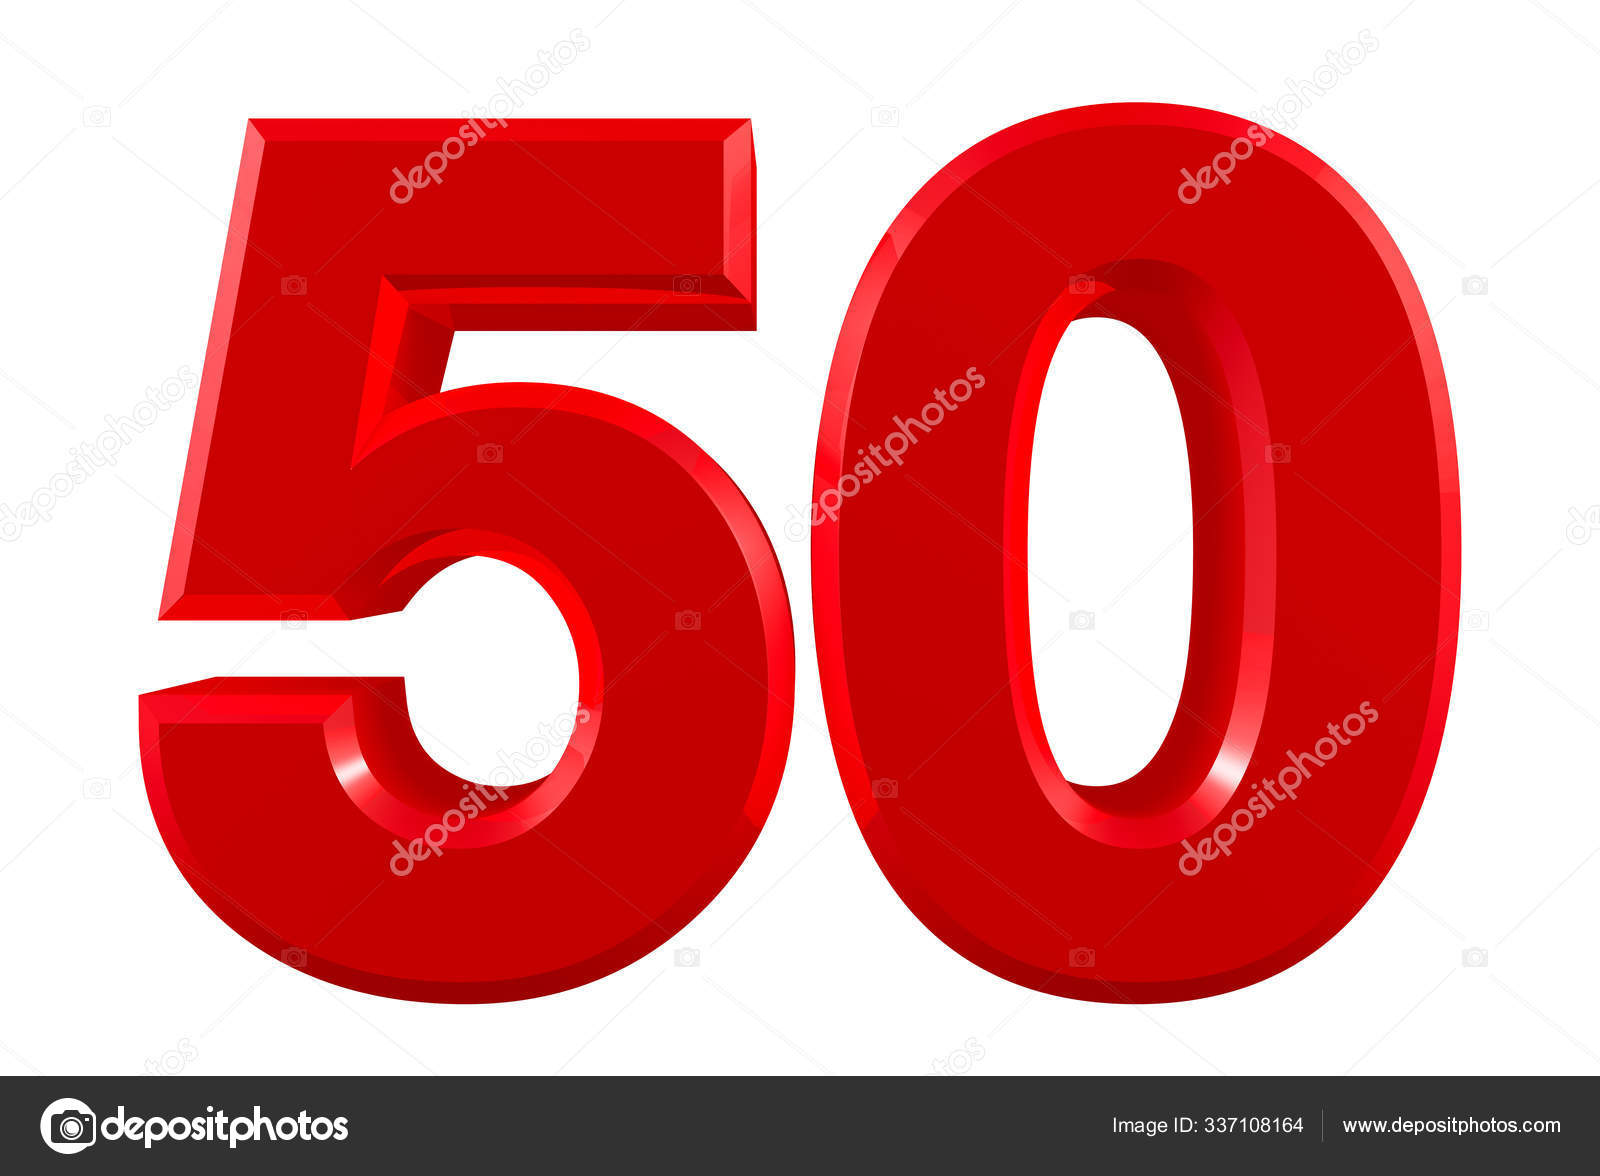 50 Para Imprimir Red numbers 50 on white background illustration 3D rendering Stock Photo by  ©tuiafalken@hotmail.com 337108164